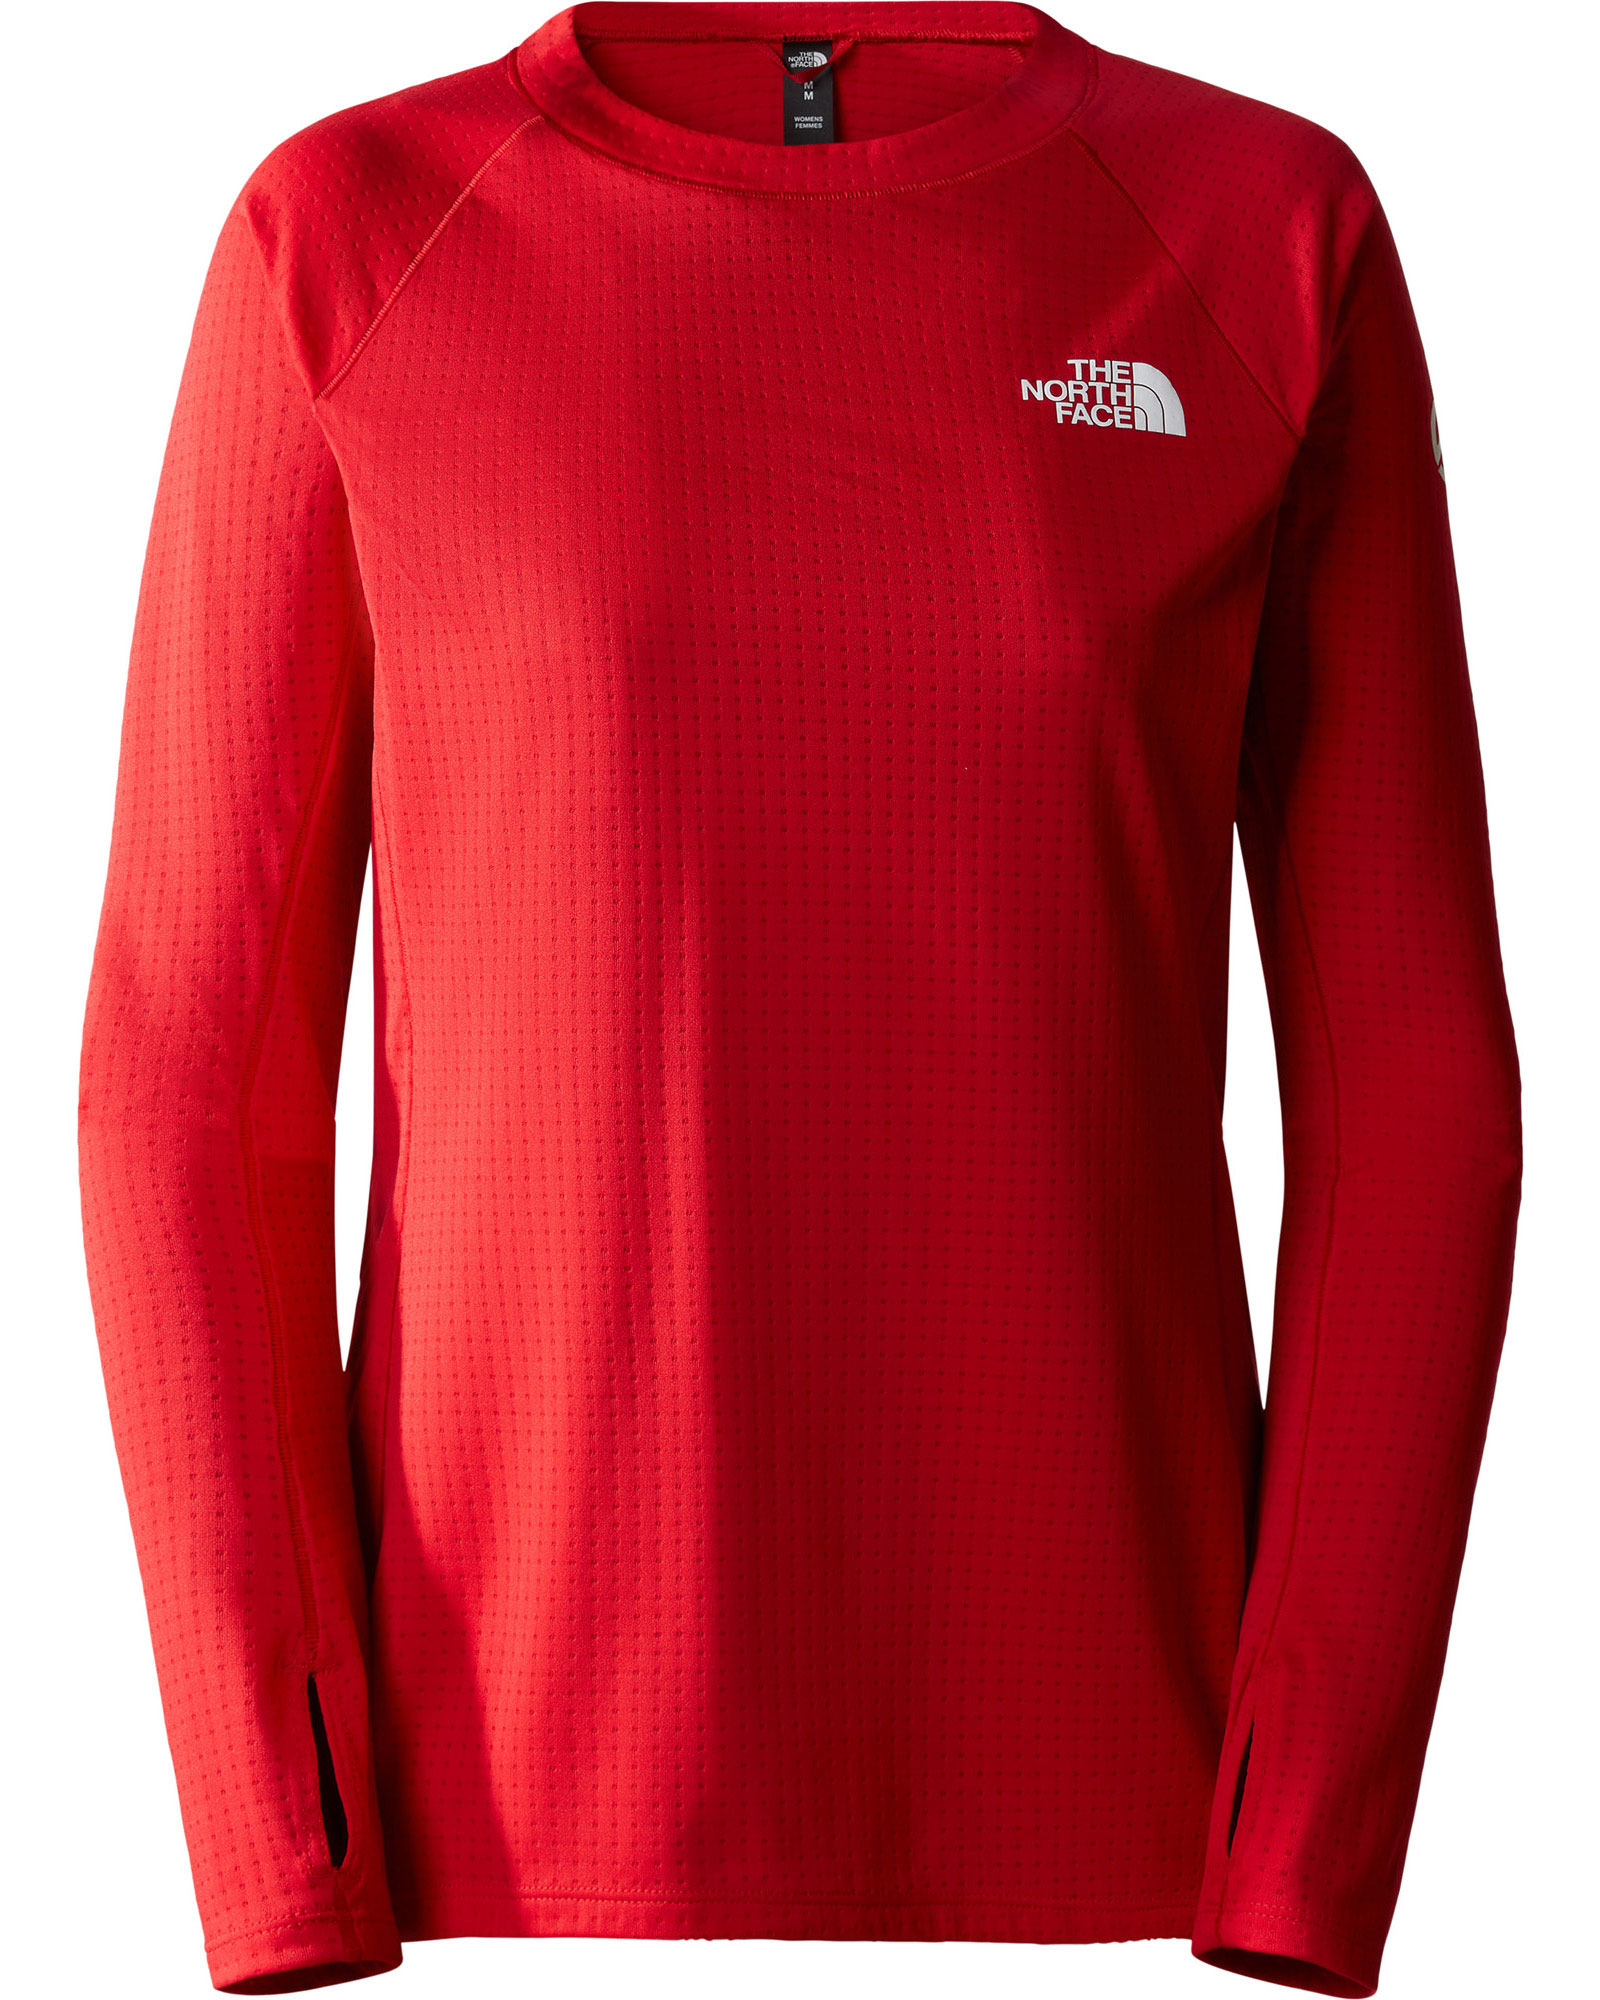 The North Face Summit Pro 120 Womens Long Sleeve Crew T-shirt